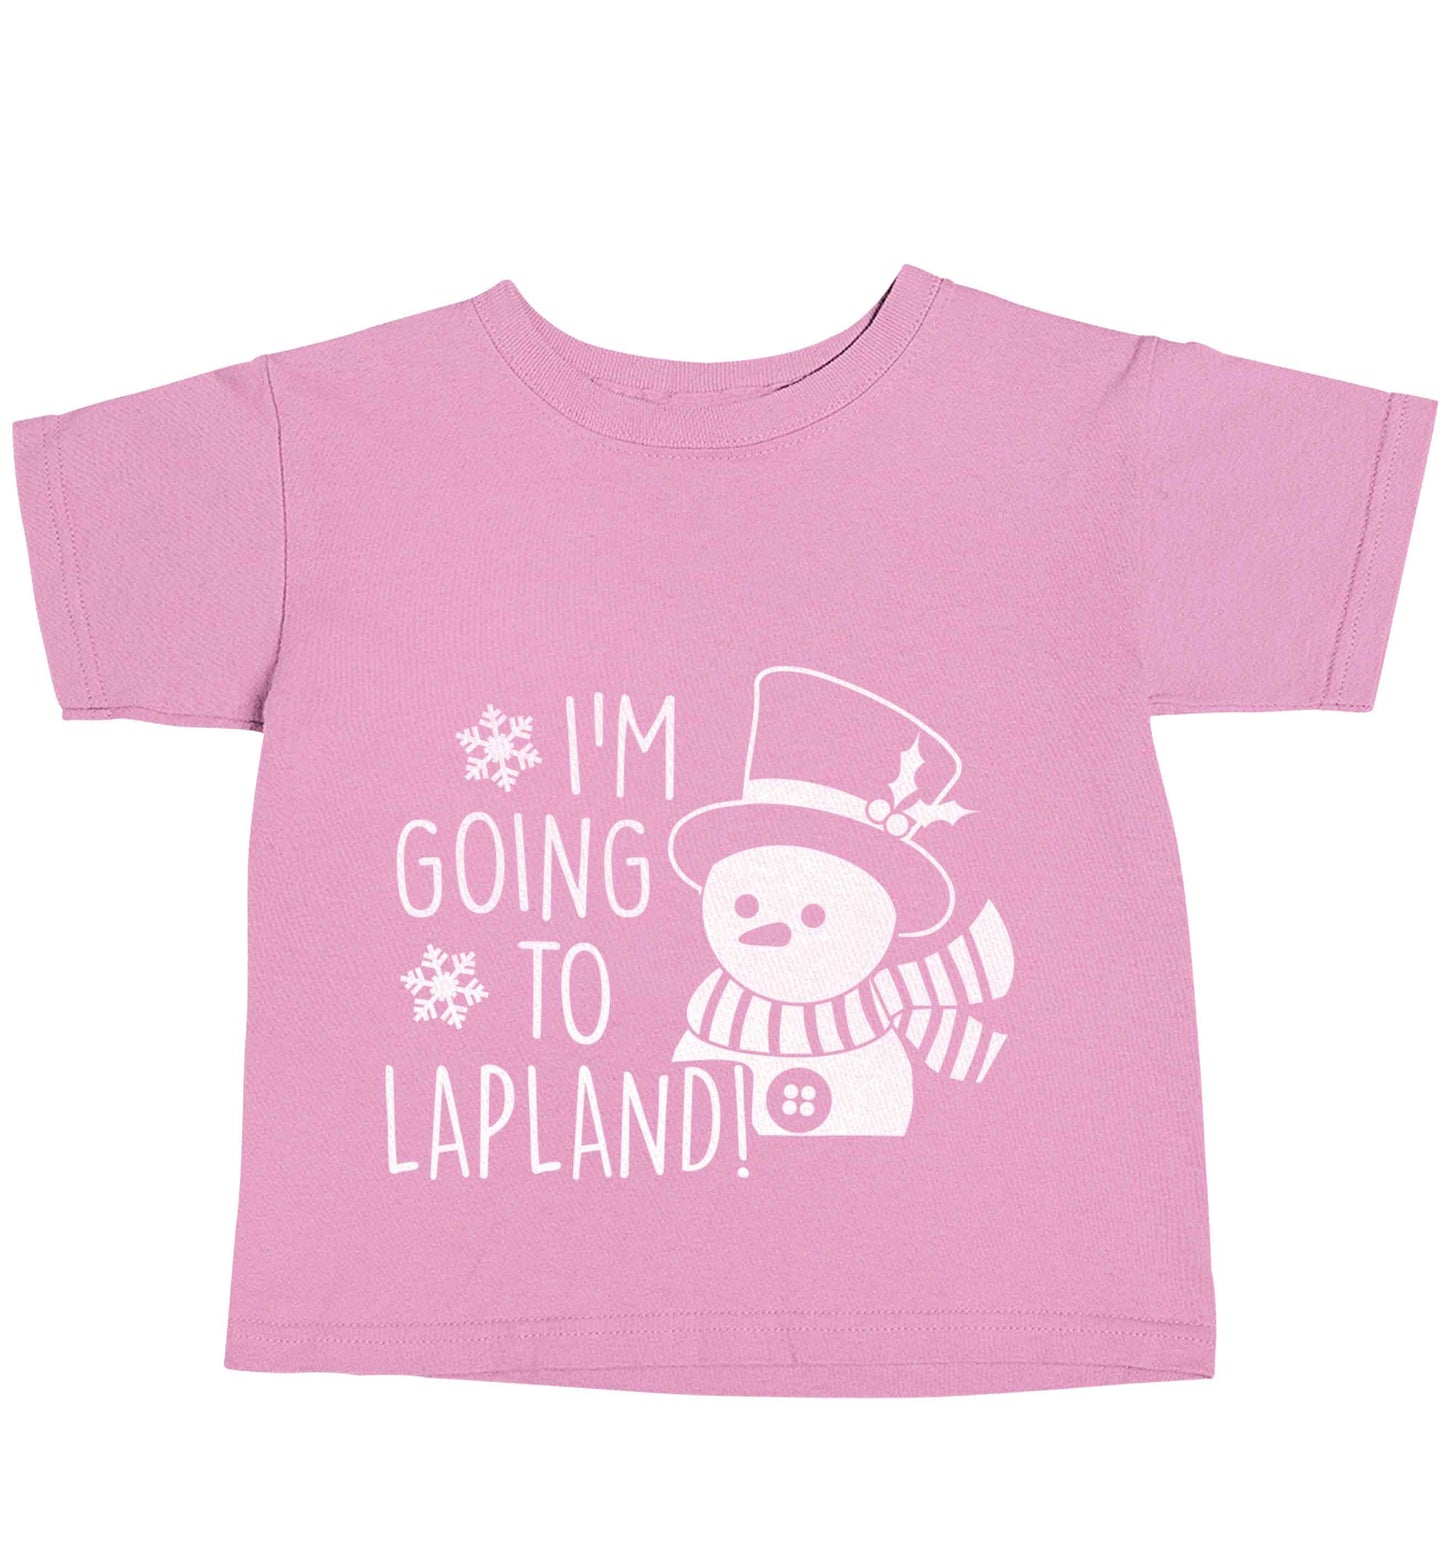 I'm going to Lapland light pink baby toddler Tshirt 2 Years